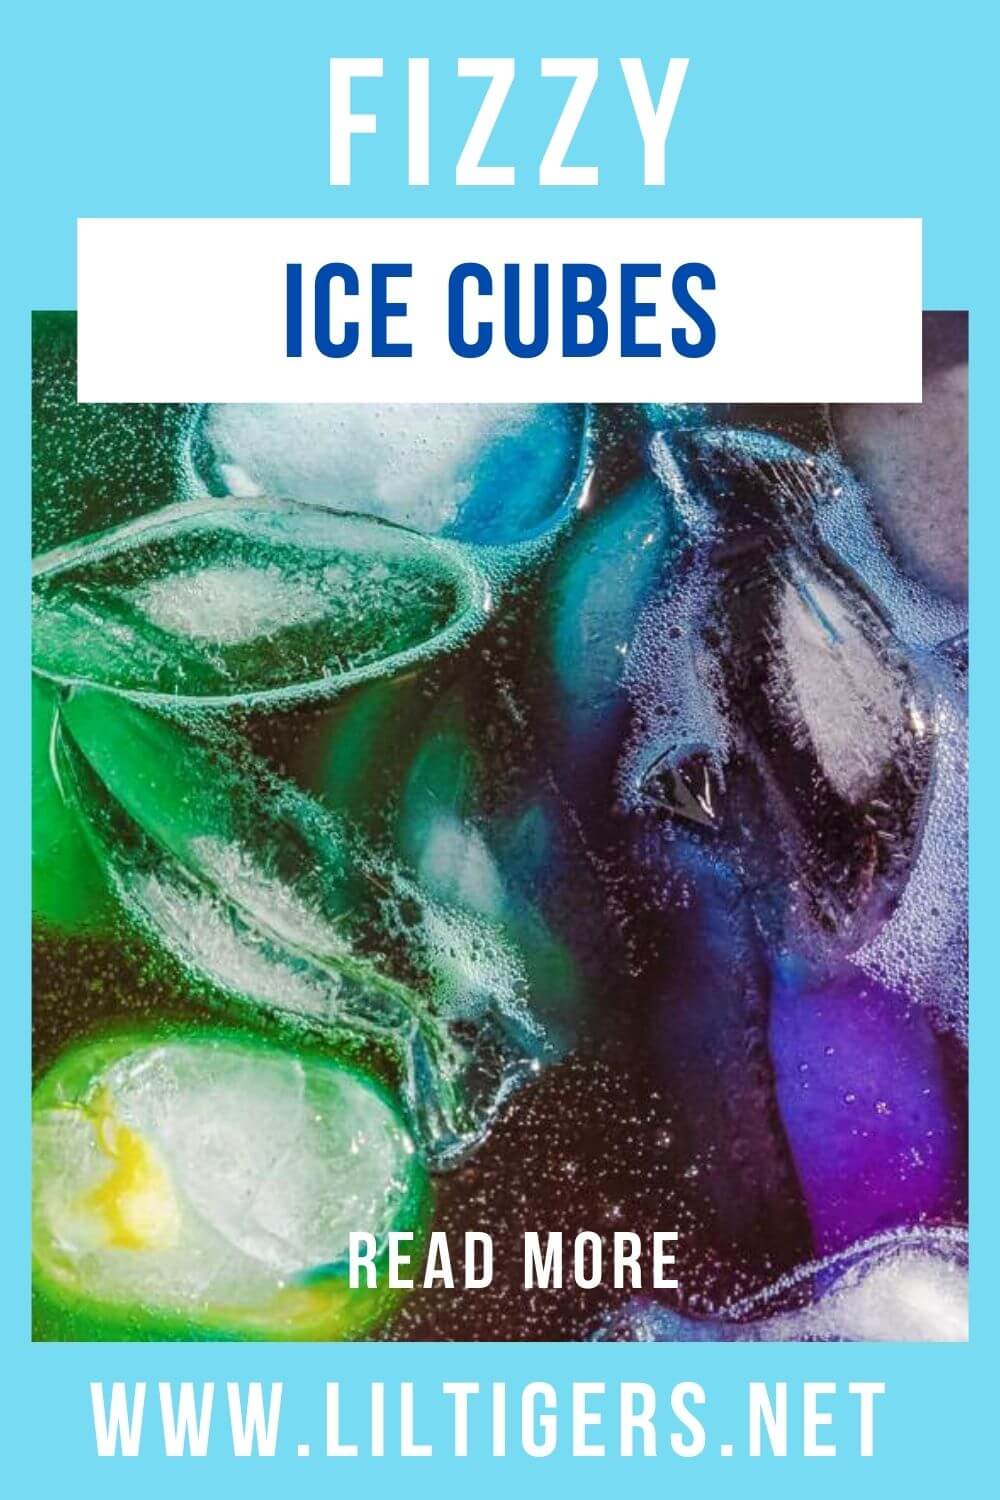 Fizzy ice cube experiment